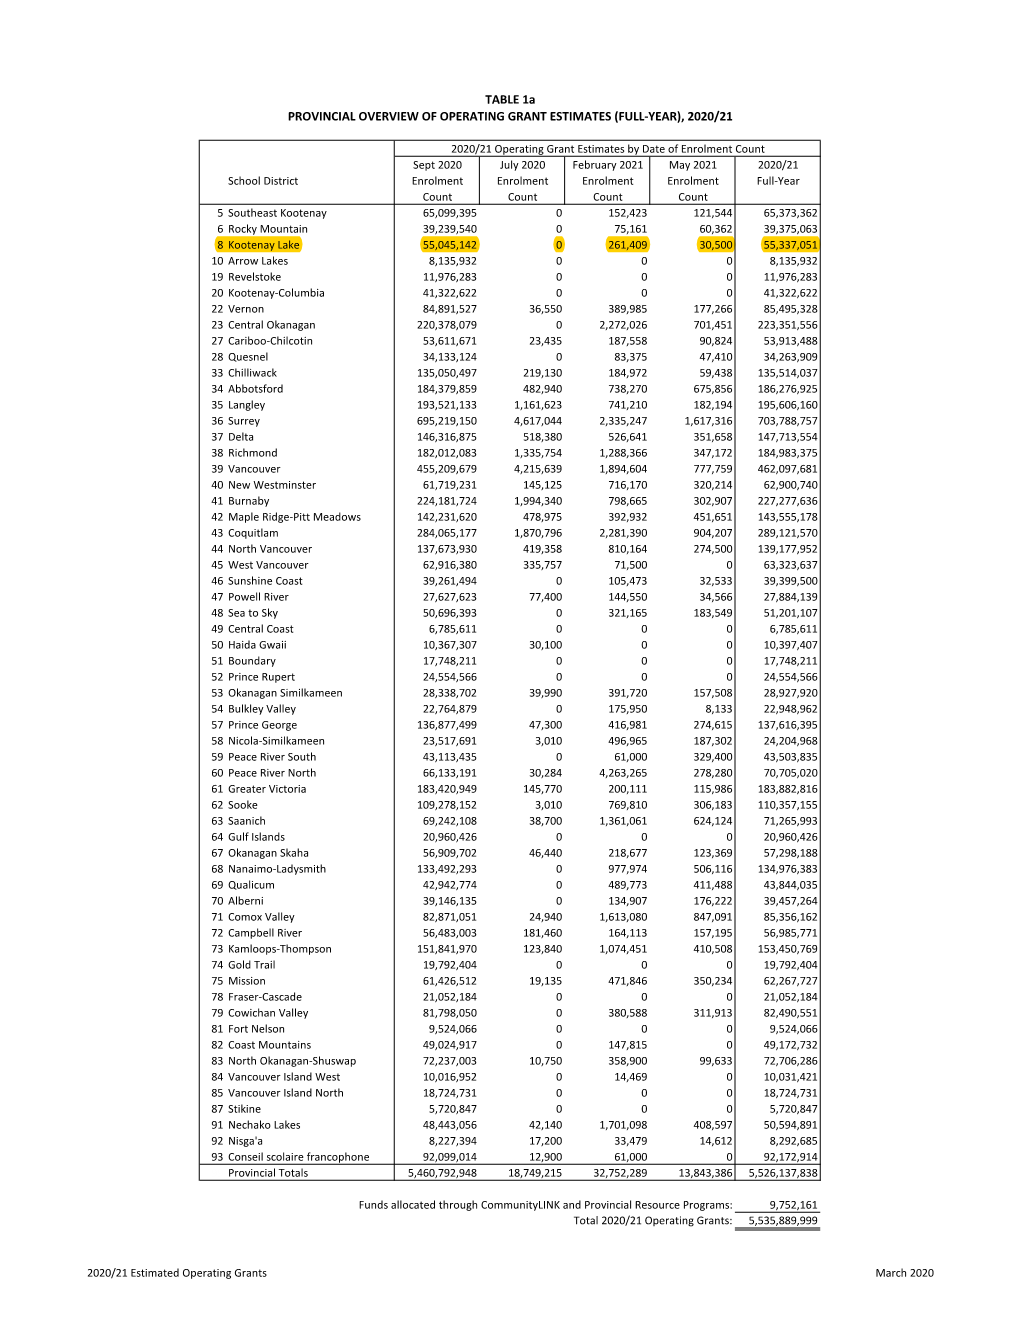 March 2020 TABLE 1B PROVINCIAL OVERVIEW of ESTIMATED FUNDED FTE ENROLMENT (FULL-YEAR), 2020/21